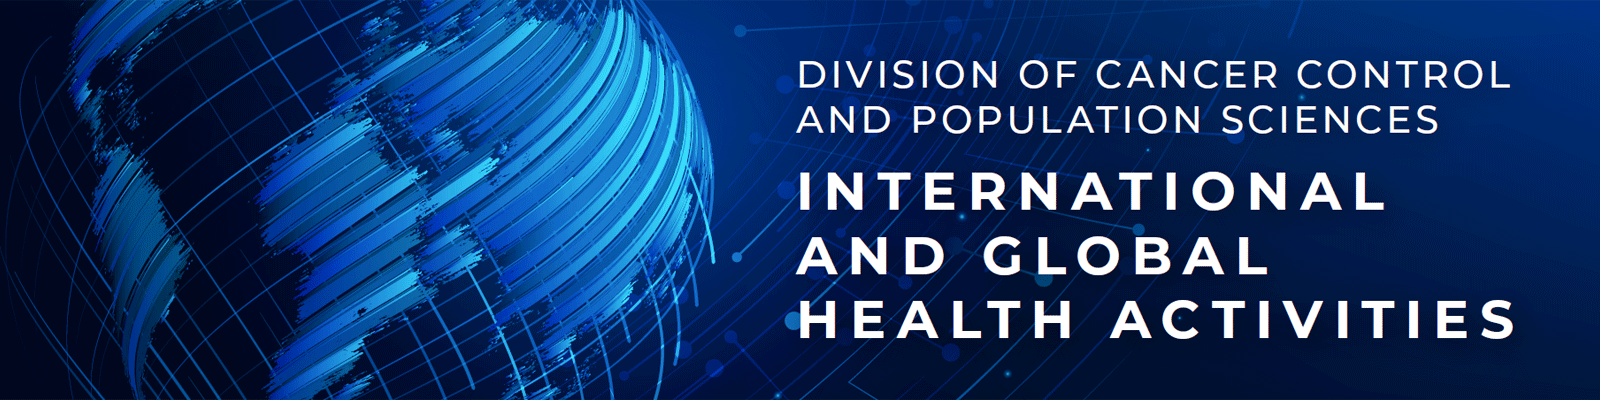 Division of Cancer Control and Population Sciences: International and Global Health Activities